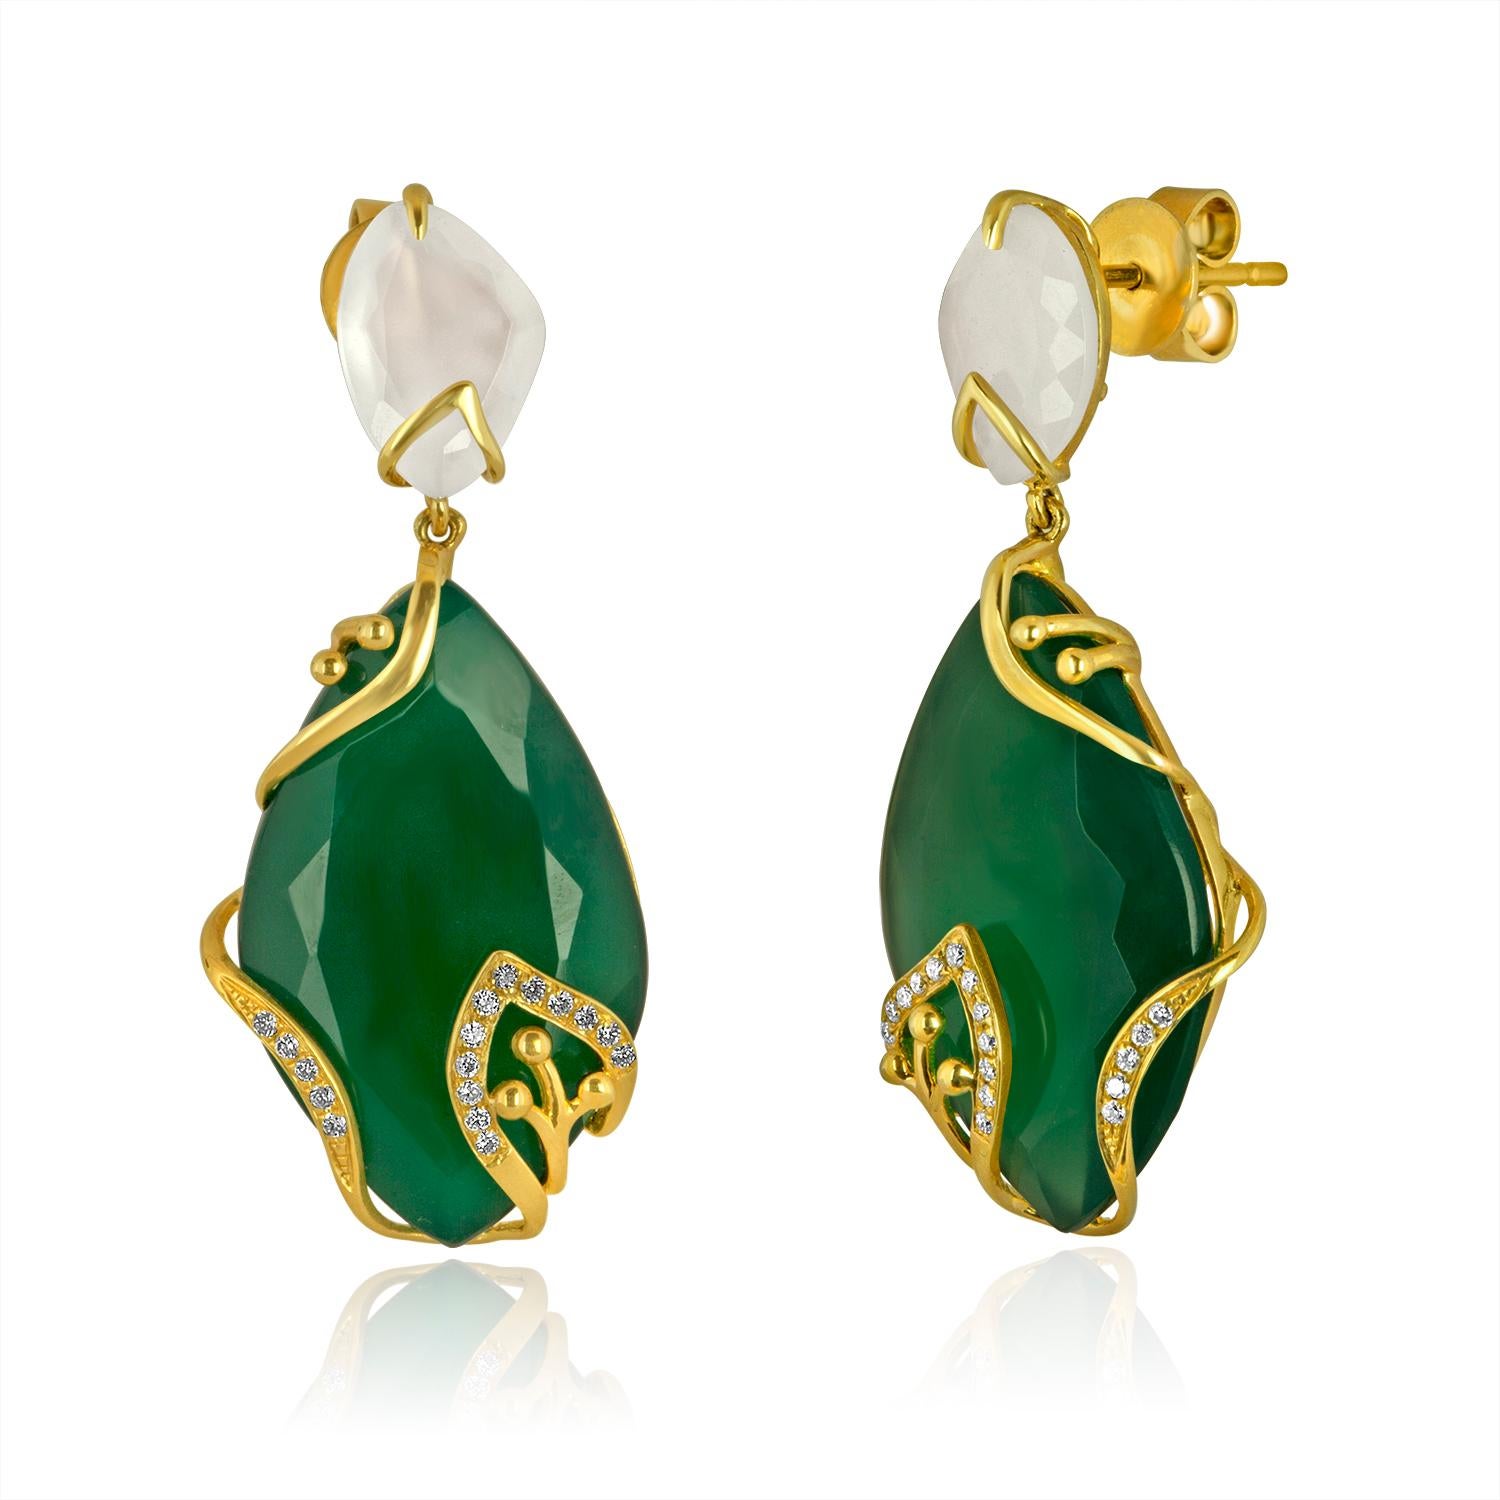 Green Agate and Chalcedony Drop earrings with Diamonds 
Set in 14K Yellow Gold
19.03Ct of Green Agate
2.12Ct of Chalcedony
0.11Ct of Diamonds
The earrings measure 1.5